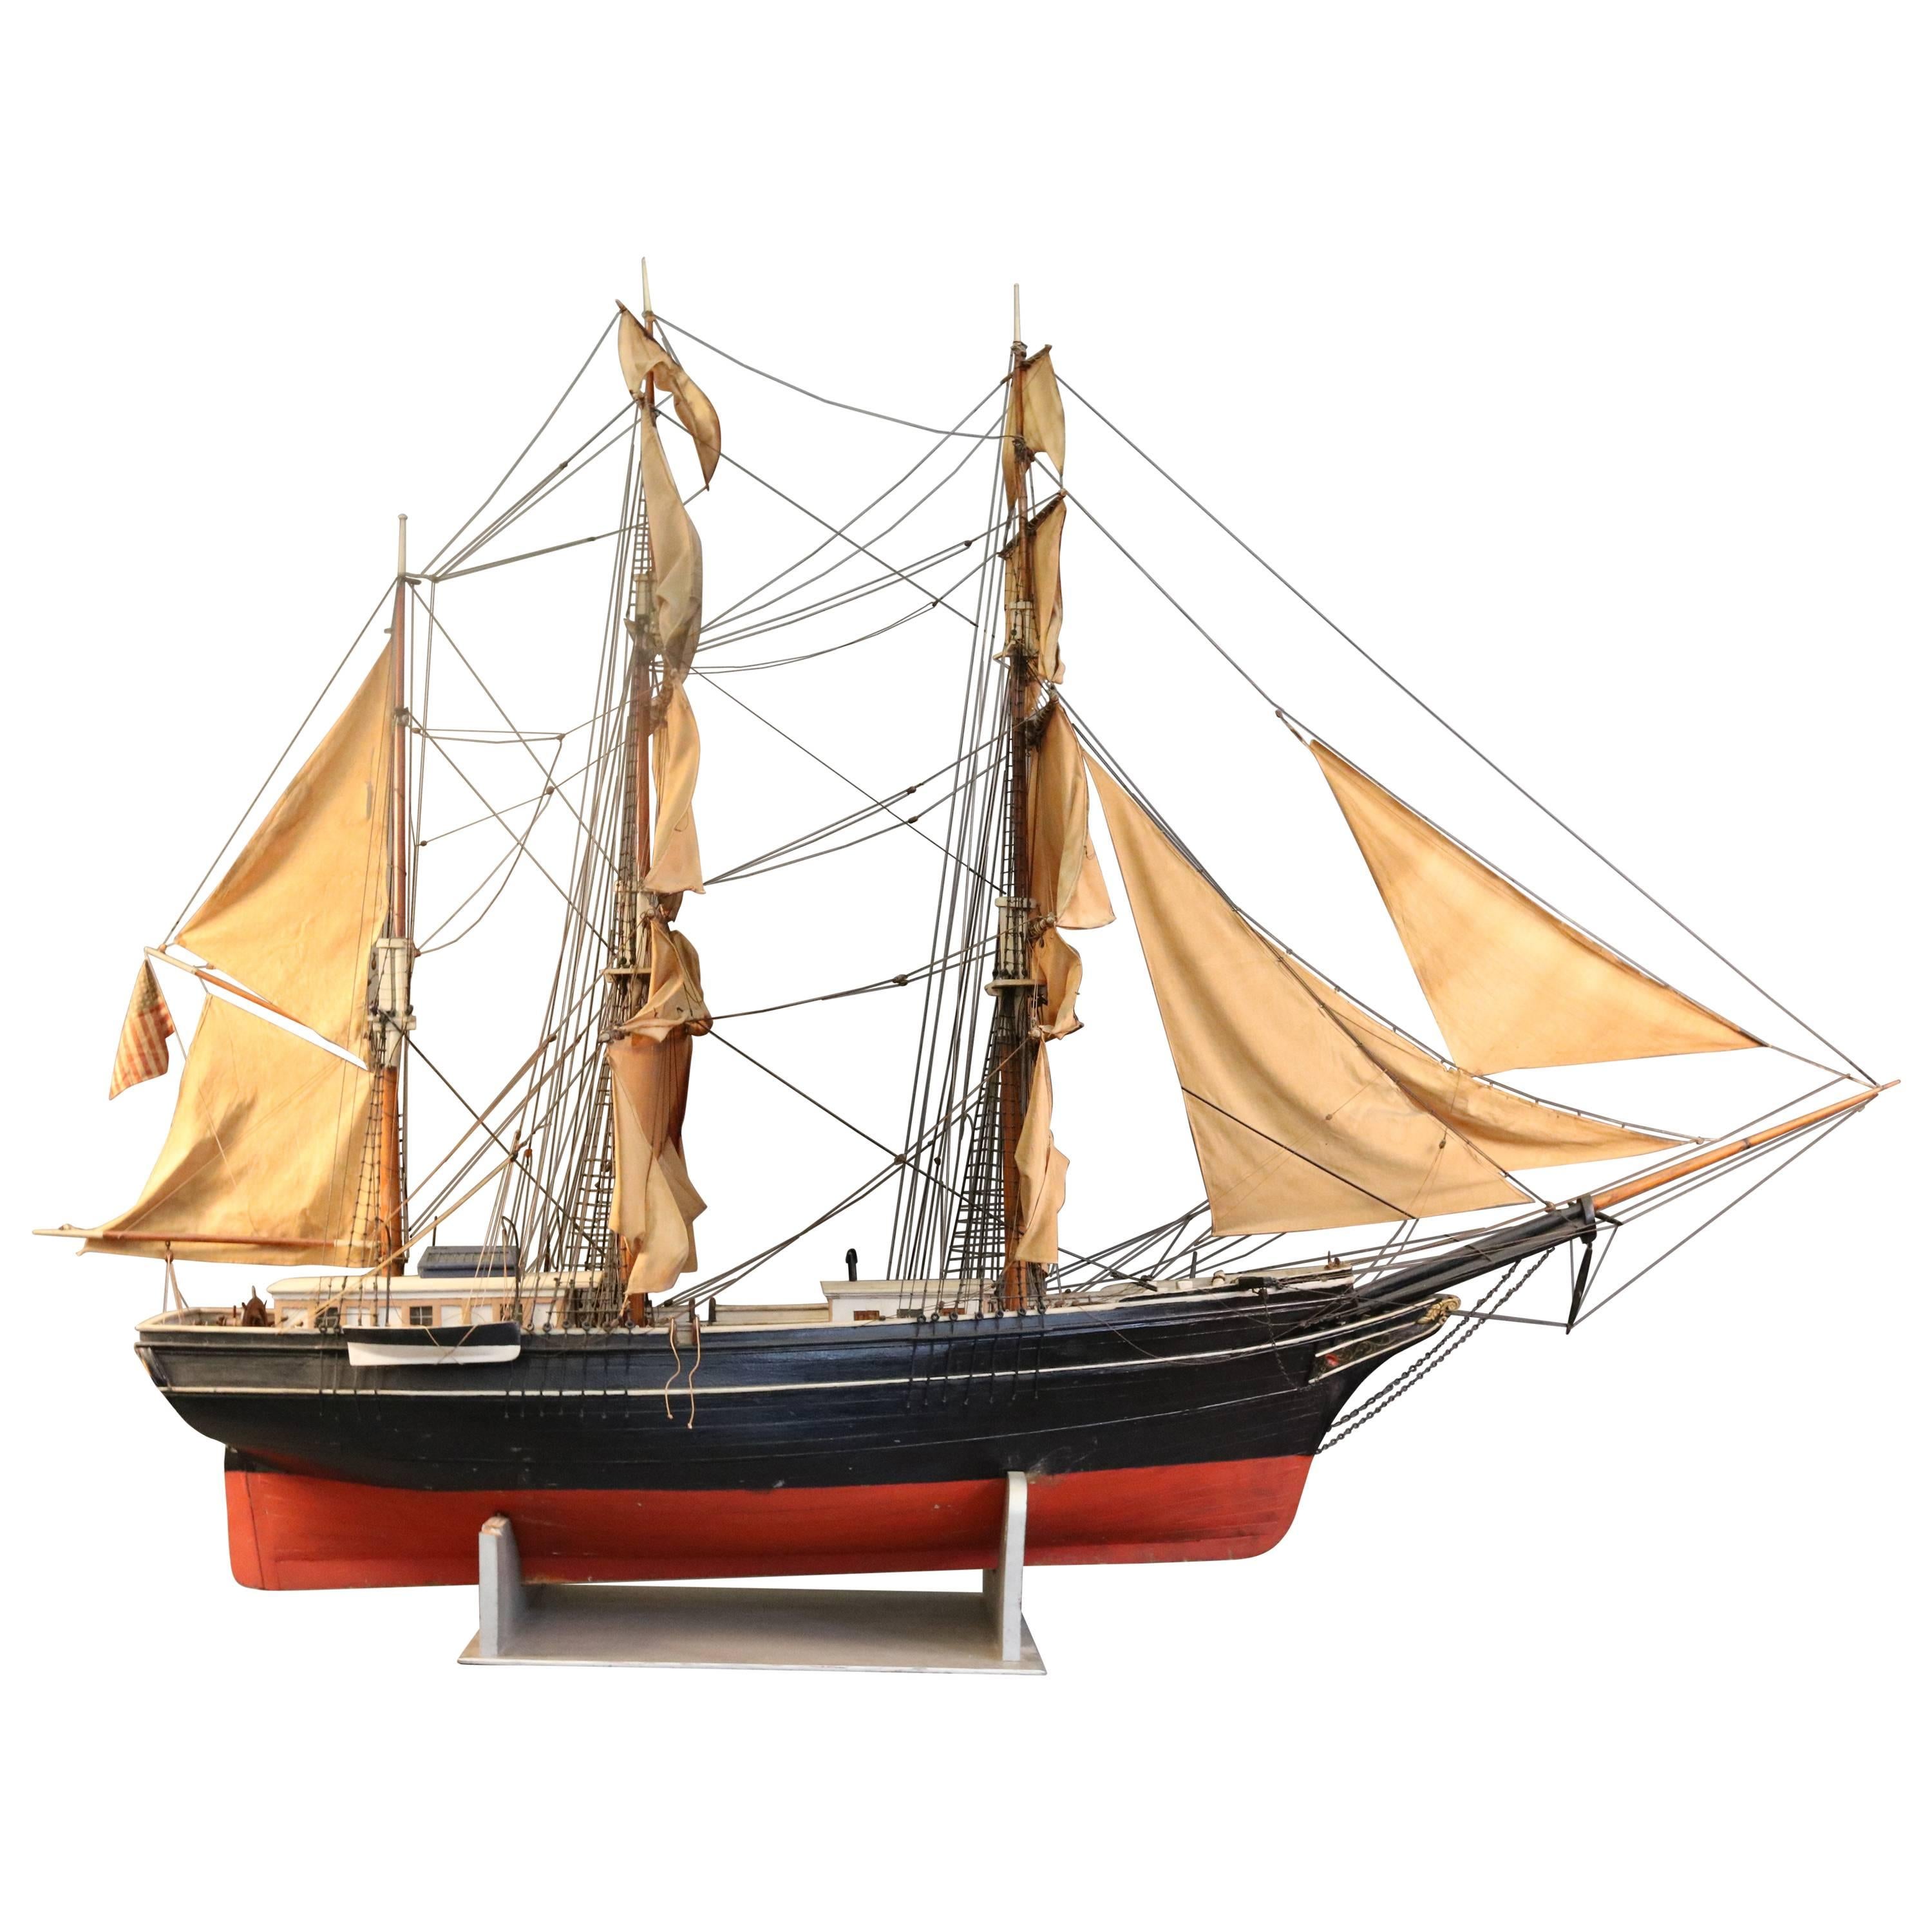 Monumental Model of a Sailing Barque For Sale at 1stDibs